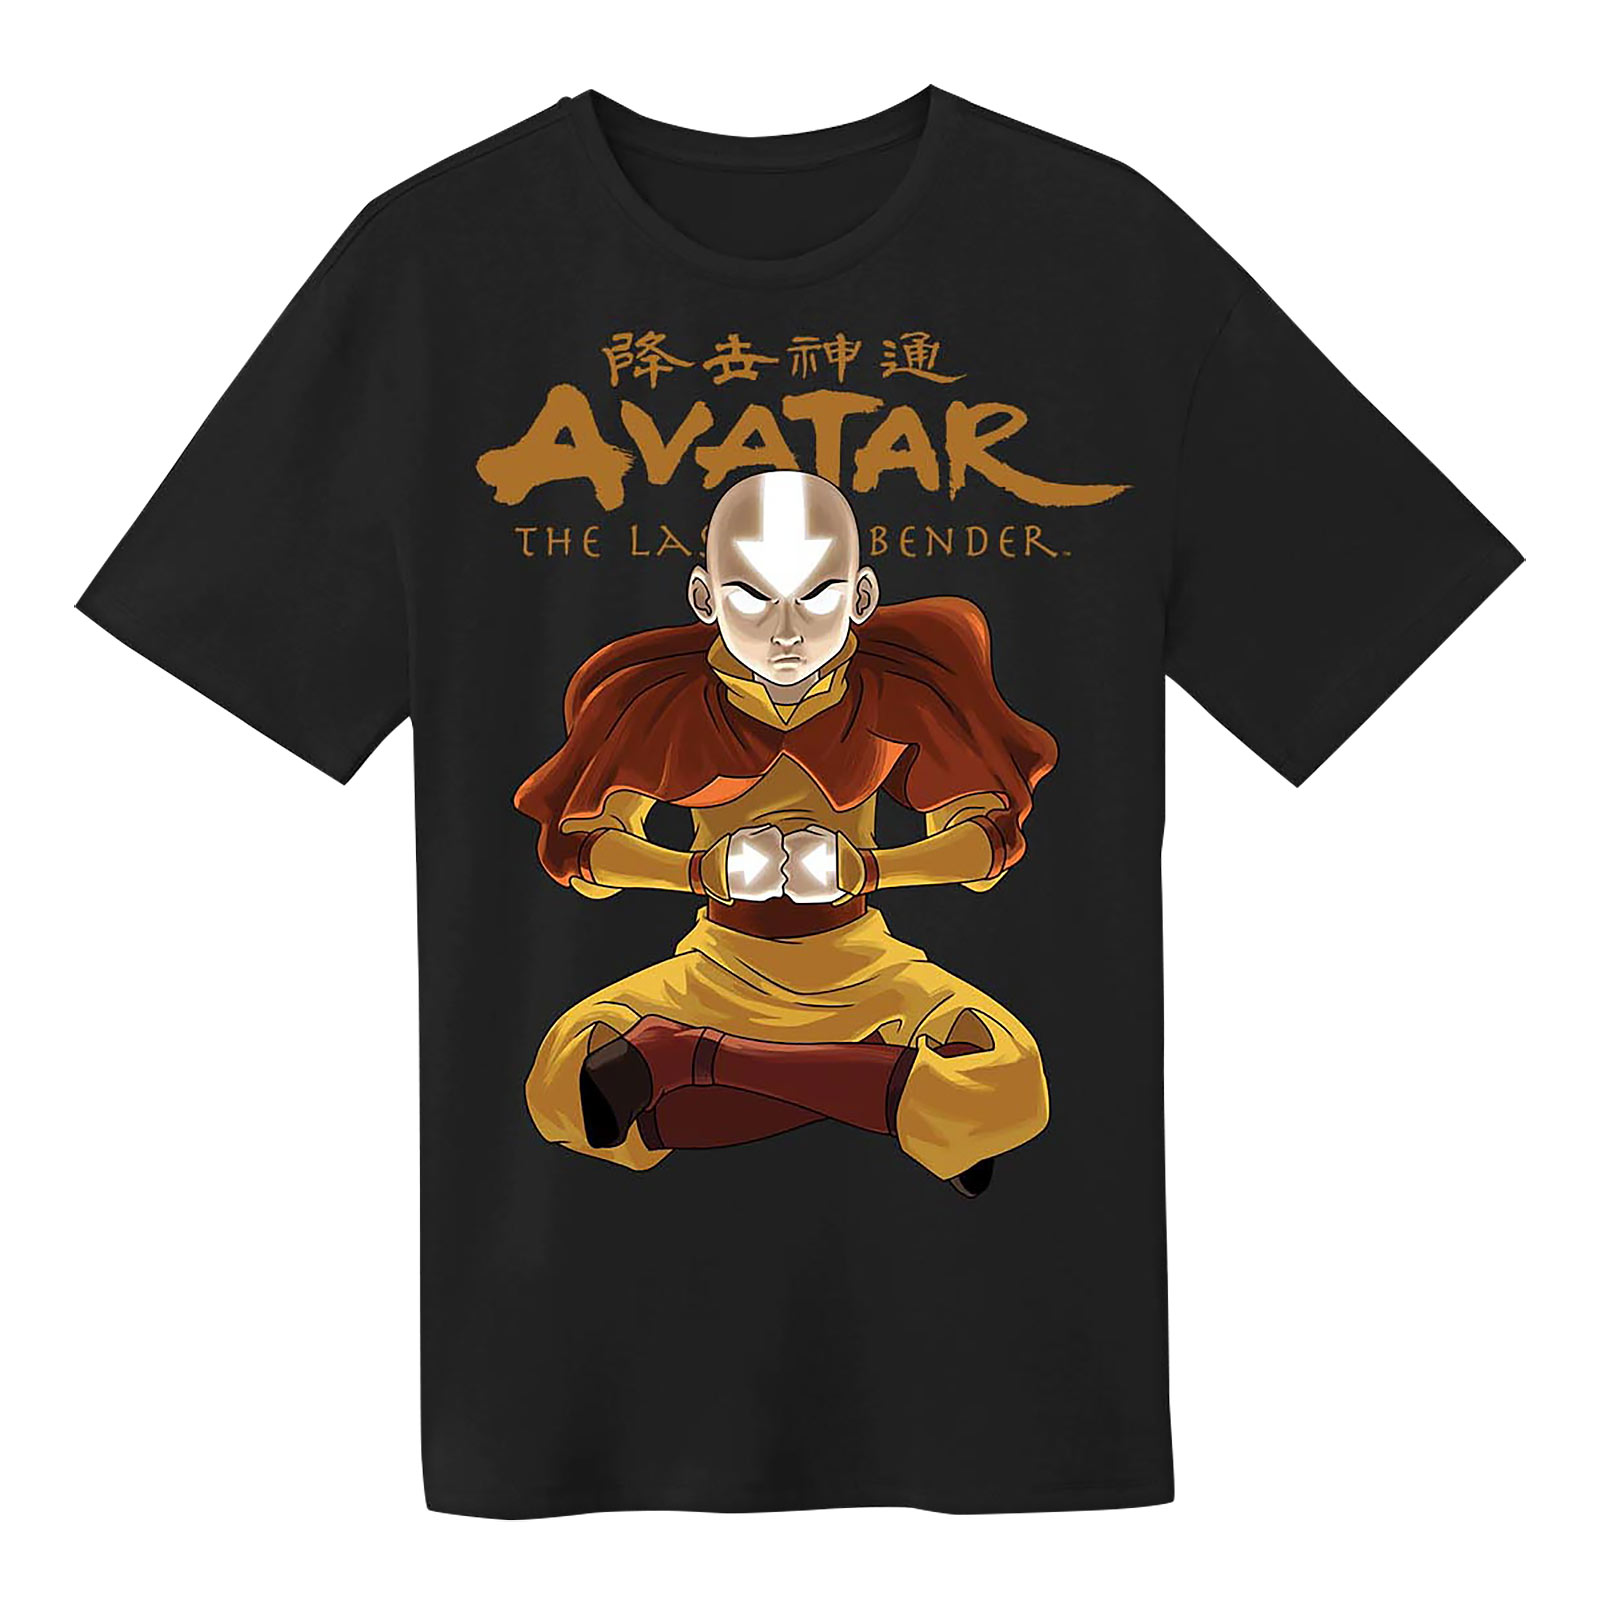 Avatar The Last Airbender - Aang State Pose T-Shirt Black